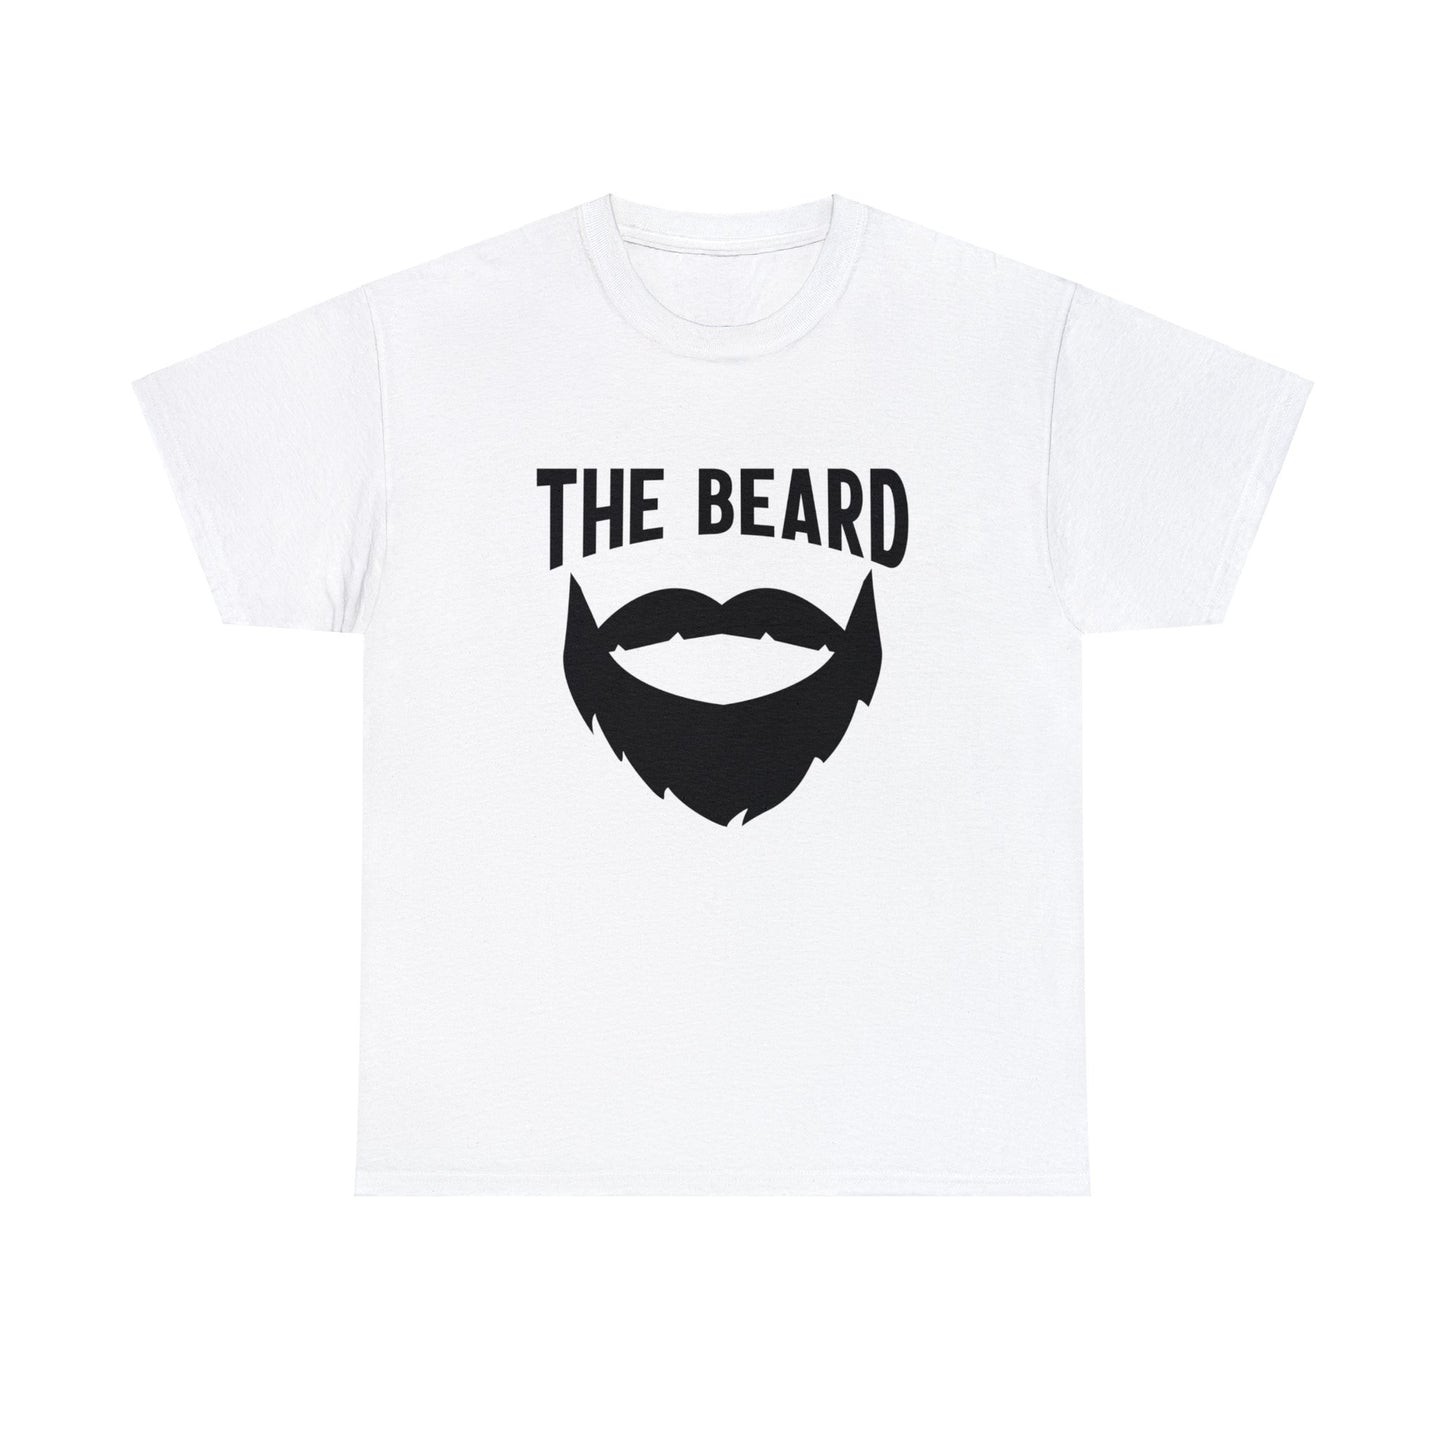 Beauty and the Beard Concept Tshirt